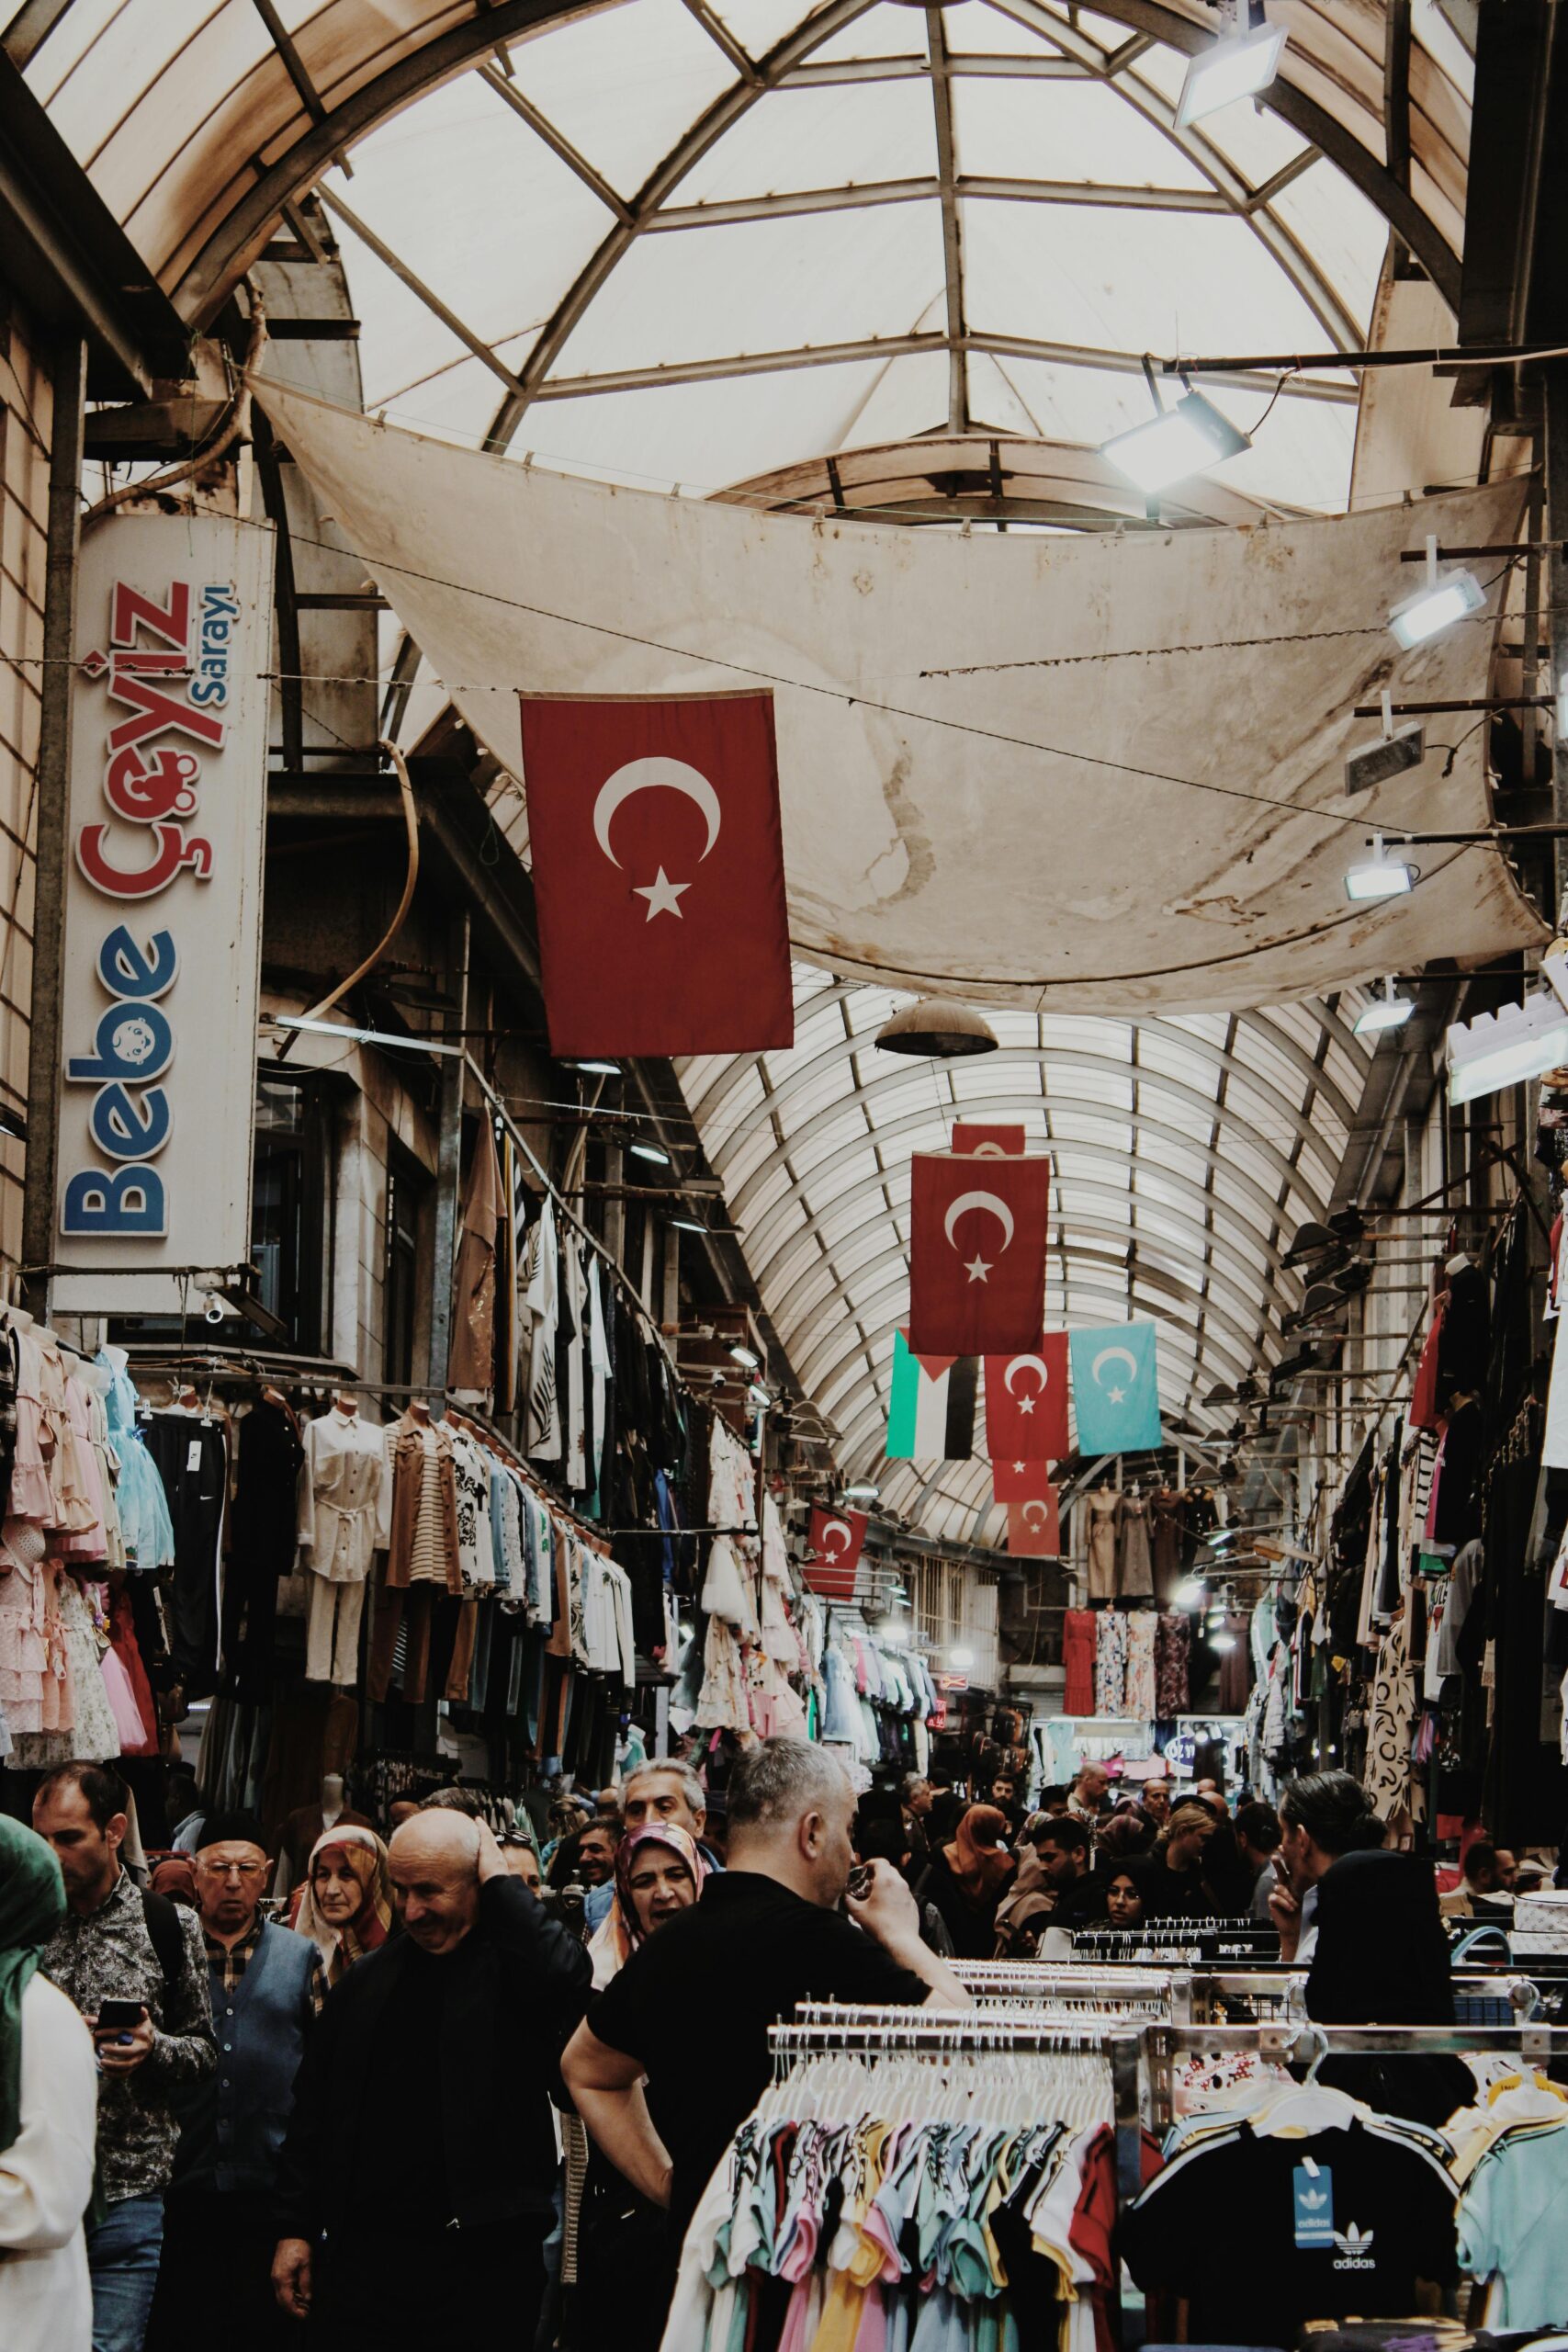 Explore the Manavgat Bazaar: Your Ultimate Guide to Shopping and Sightseeing in Manavgat Market